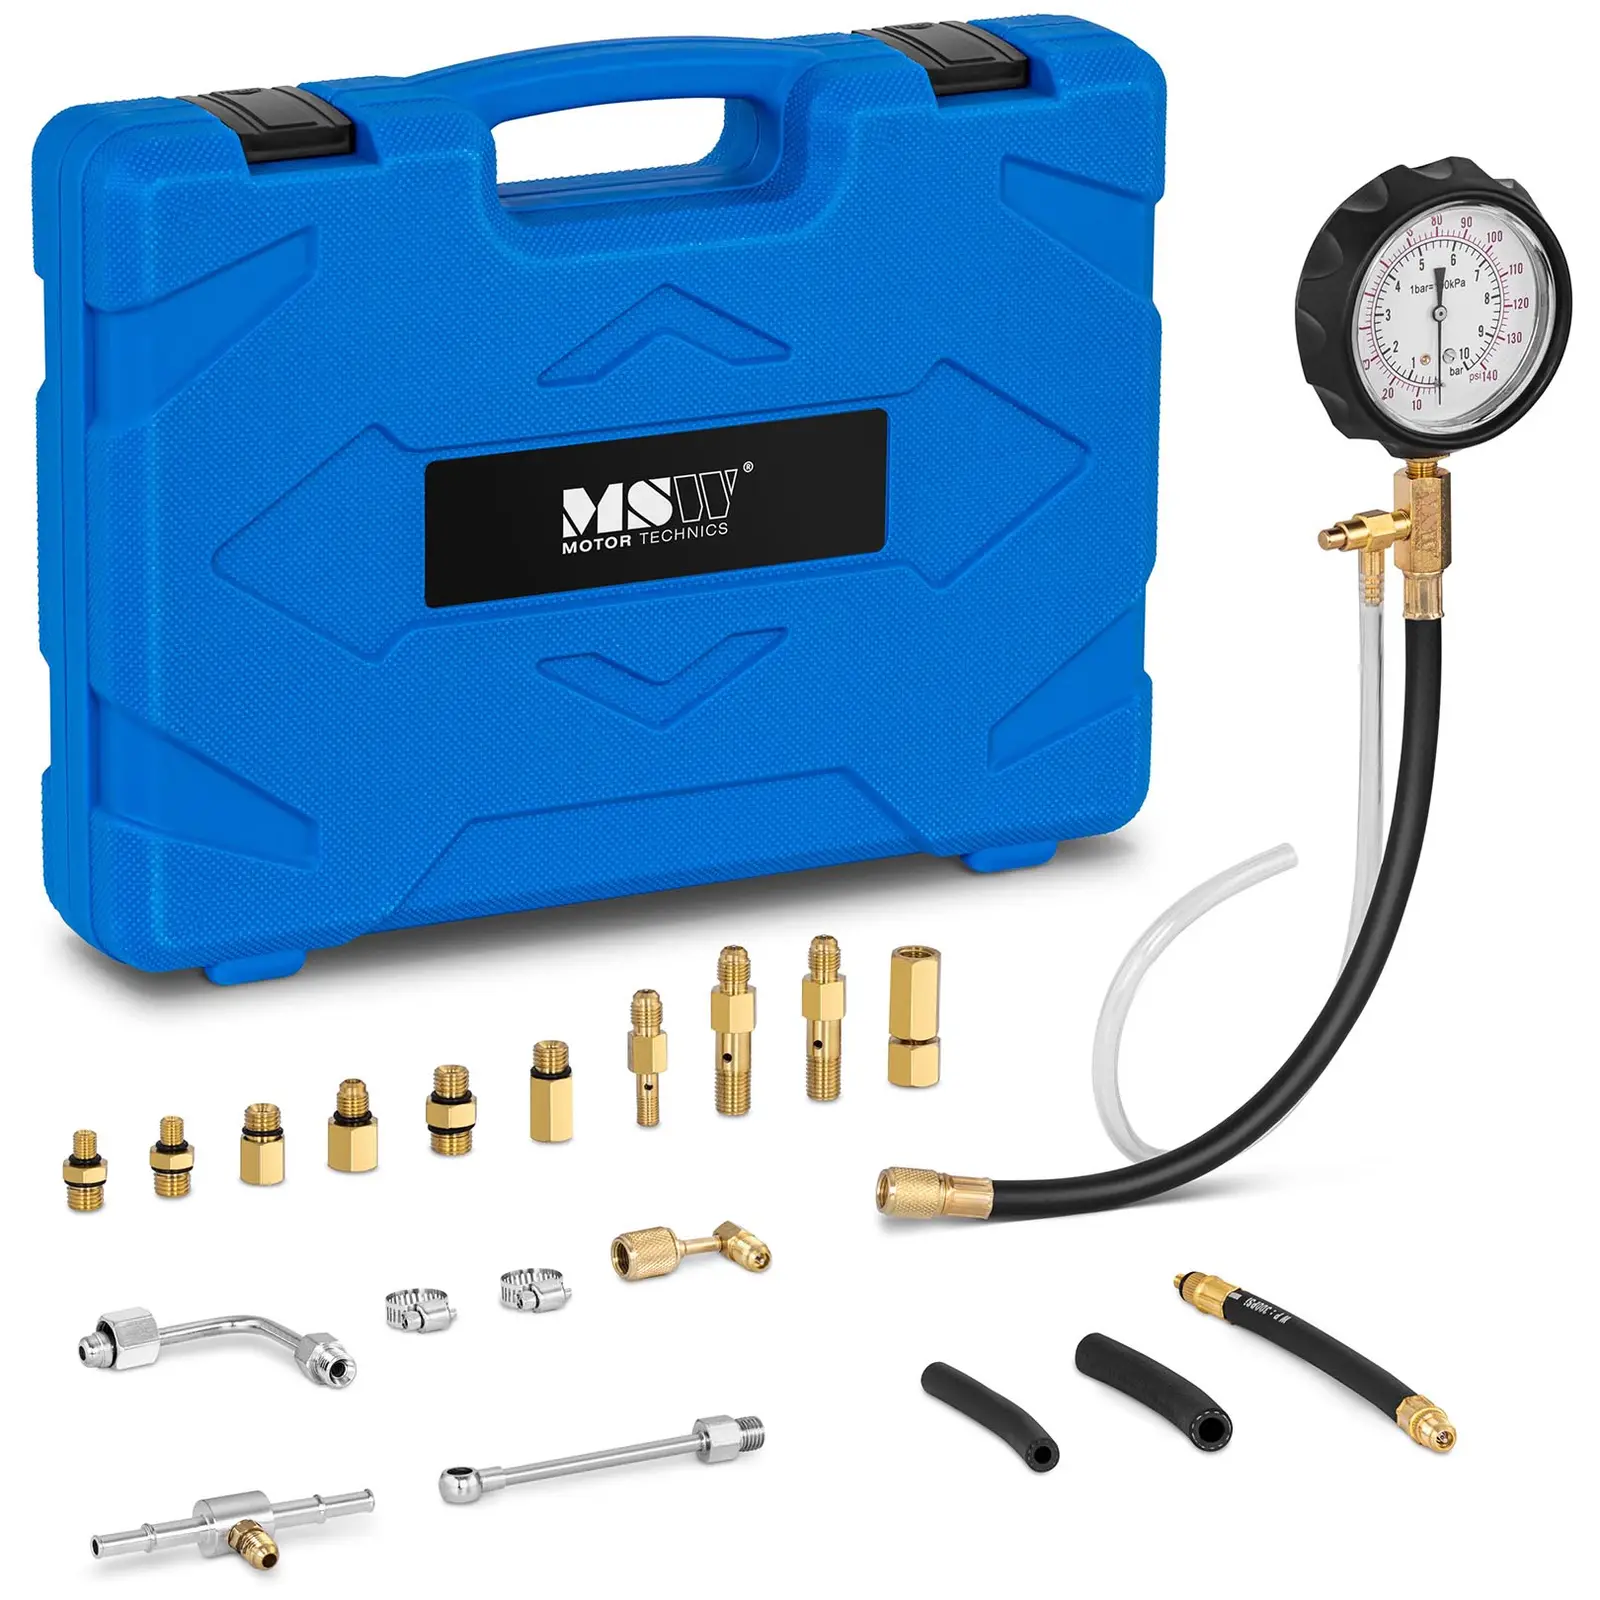 Fuel Pressure Tester - up to 9.6 bar - 20 pcs.